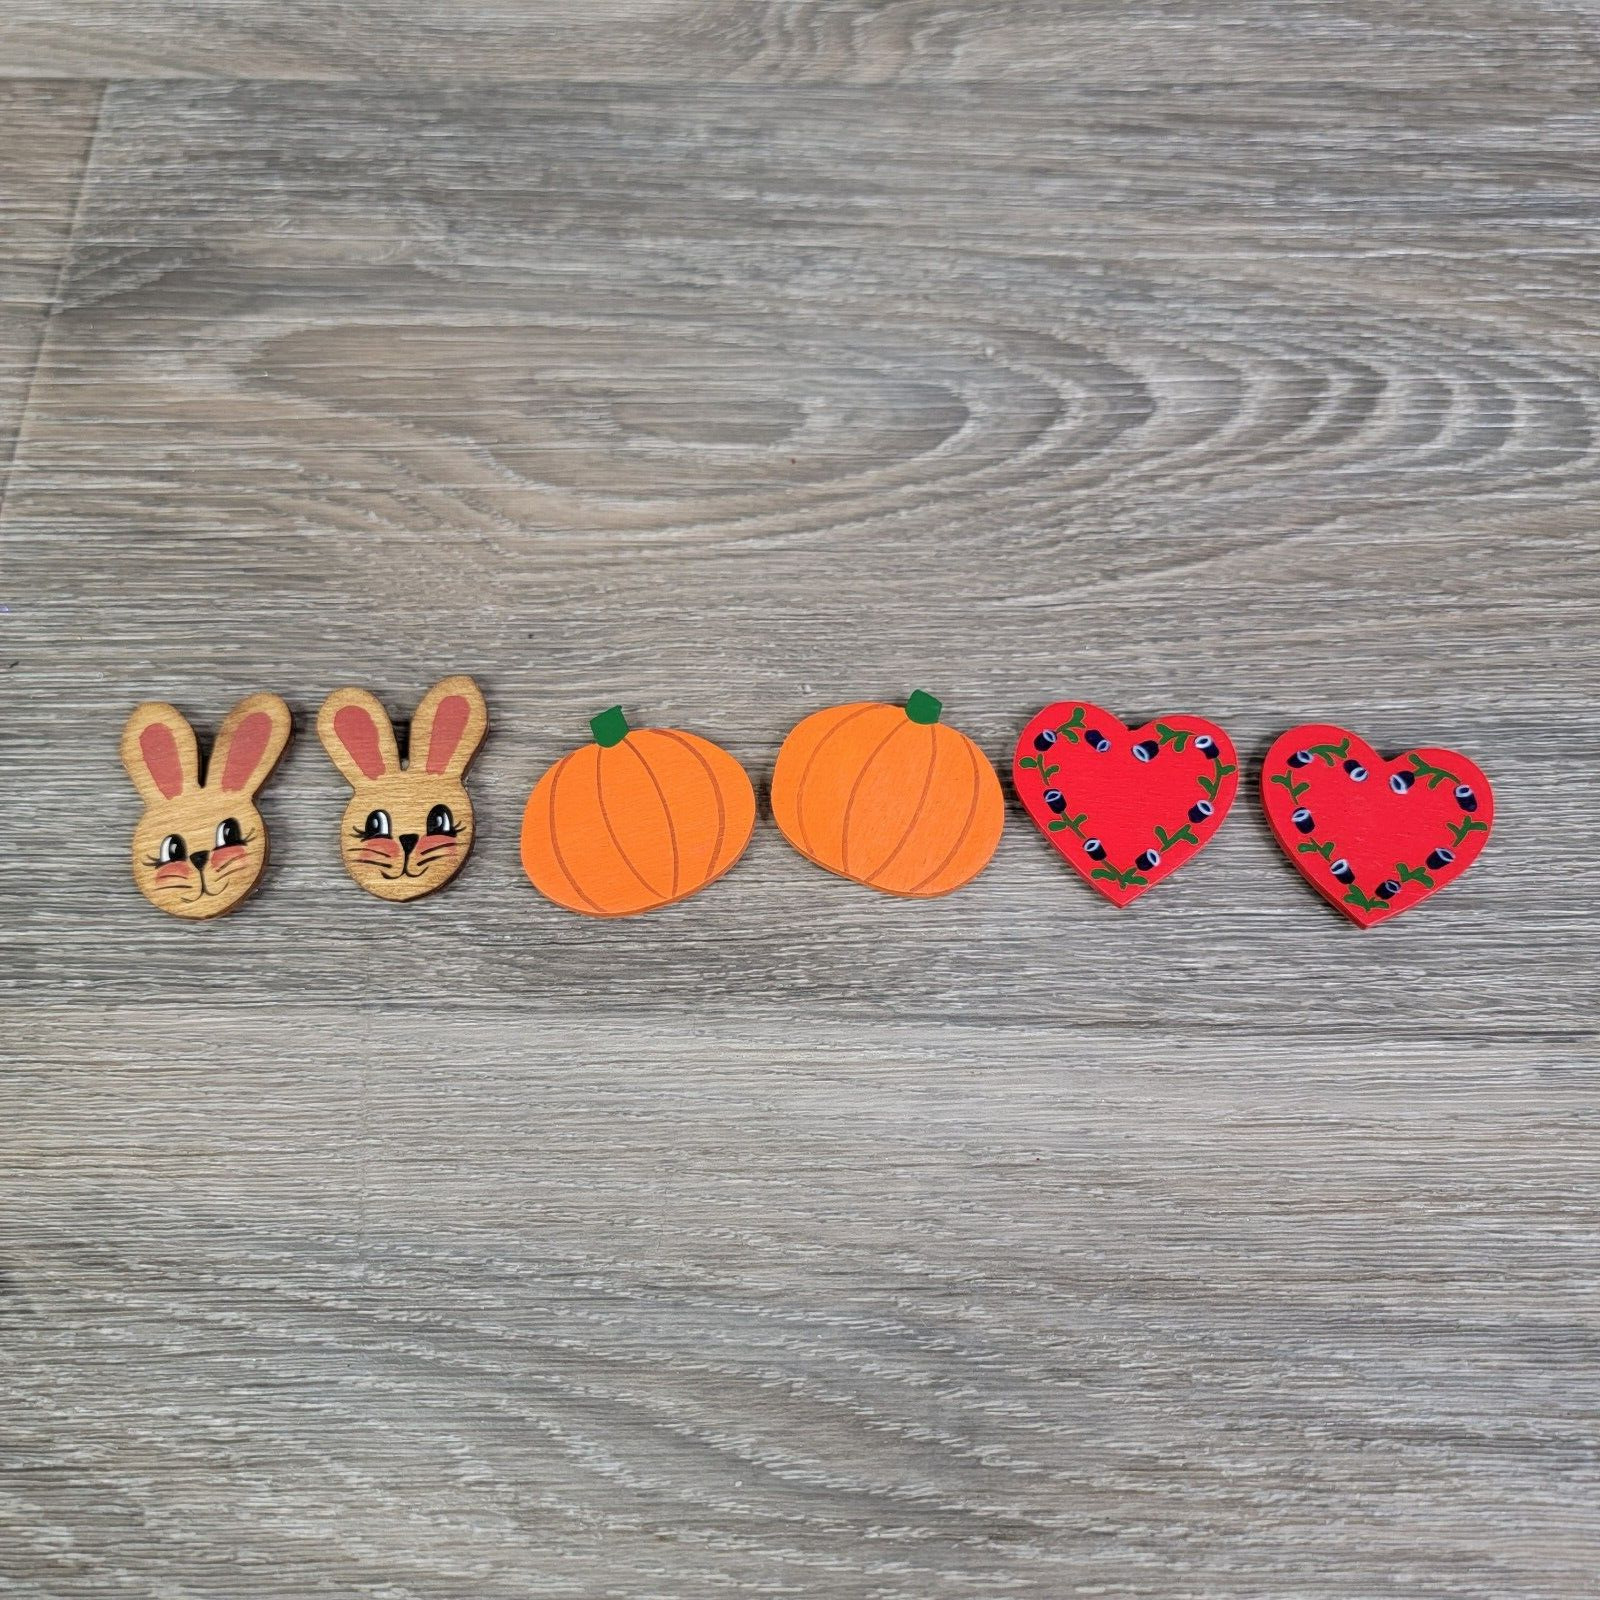 Vintage Wooden Decorations Bunny Pumpkin Heart Lot of Hook and Loop Stickey Dis